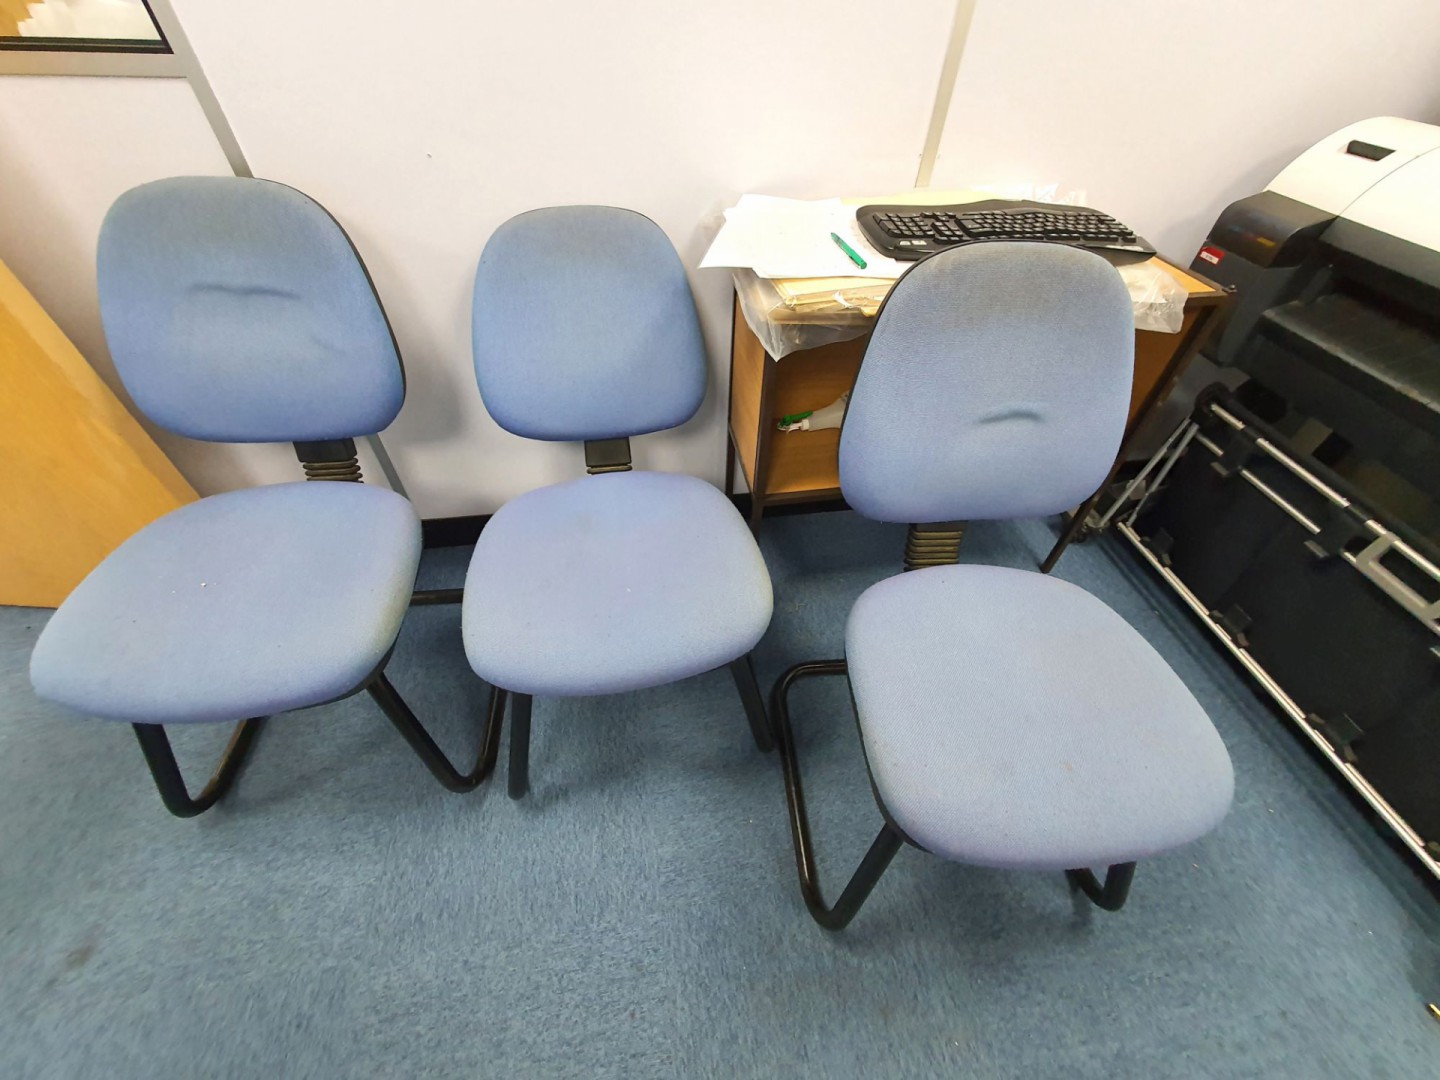 10x blue upholstered chairs - lot located at:- Cov...